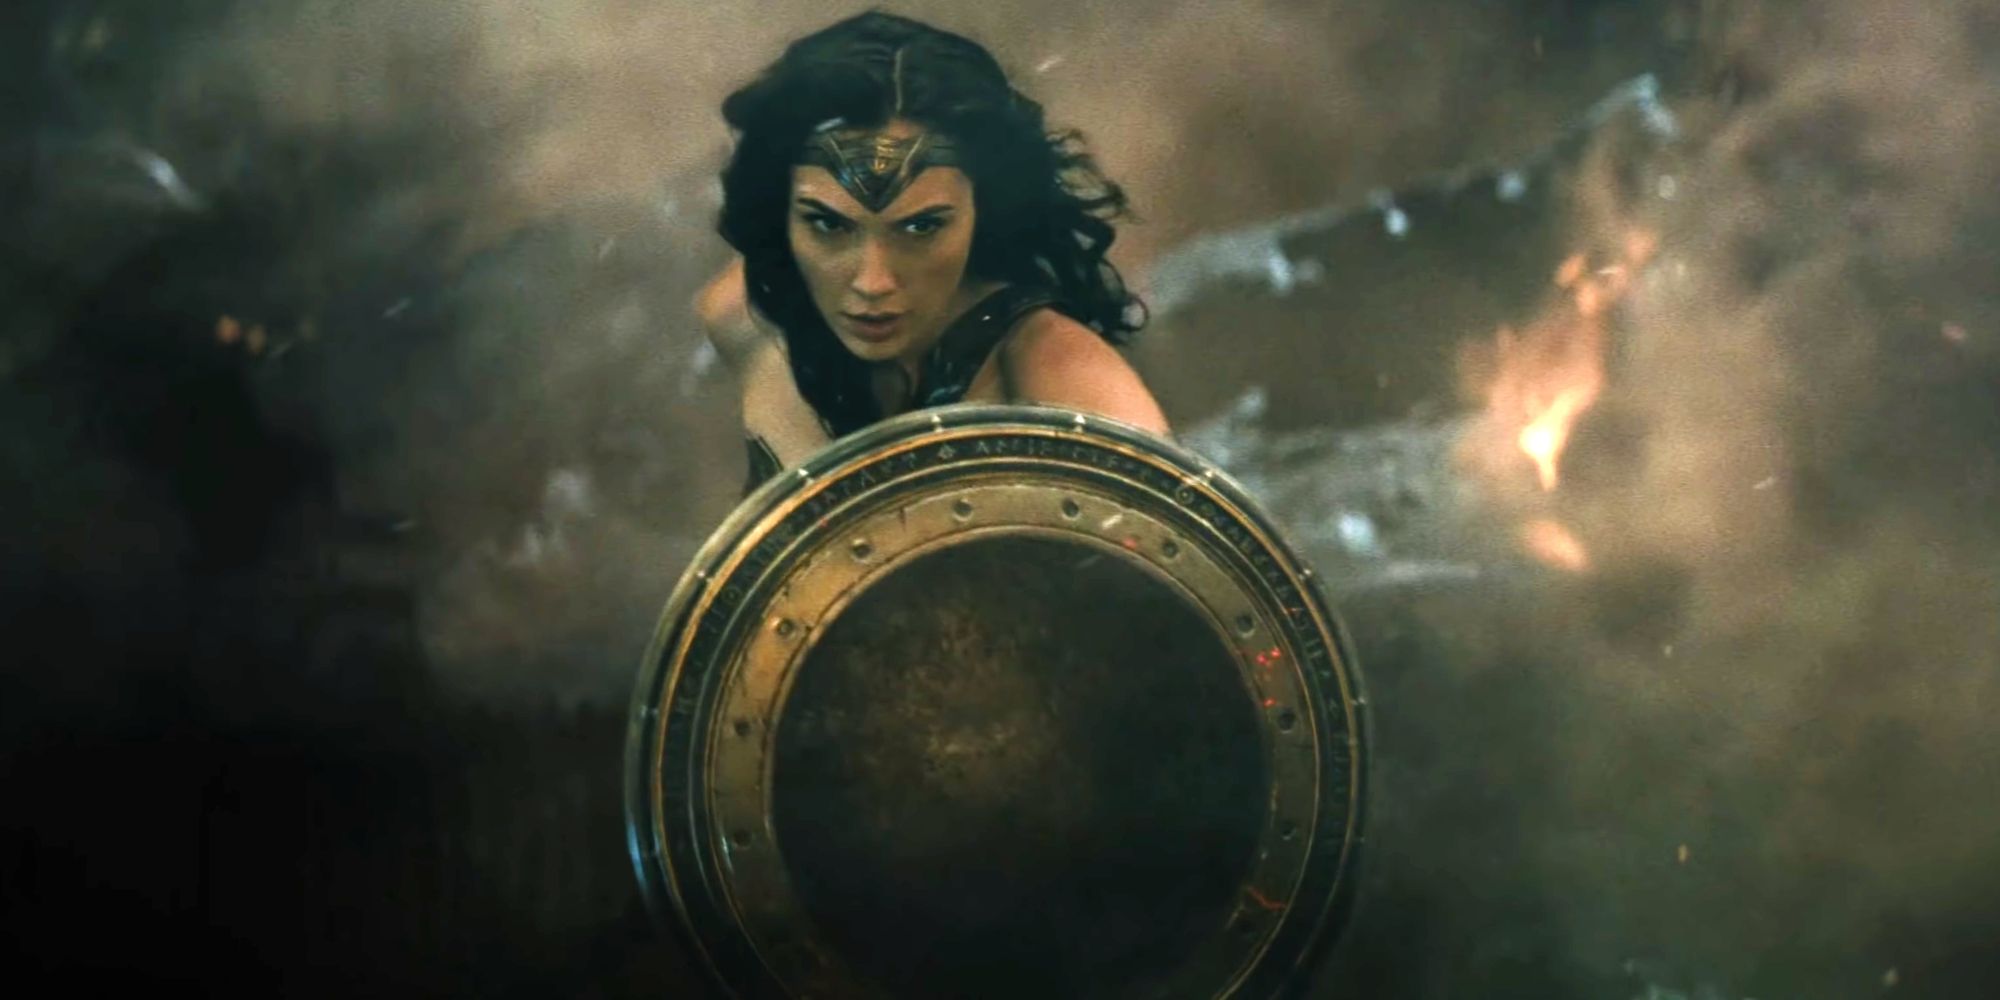 Wonder Woman wielding her shield in the battle against Doomsday in Batman V Superman Dawn Of Justice (2016)